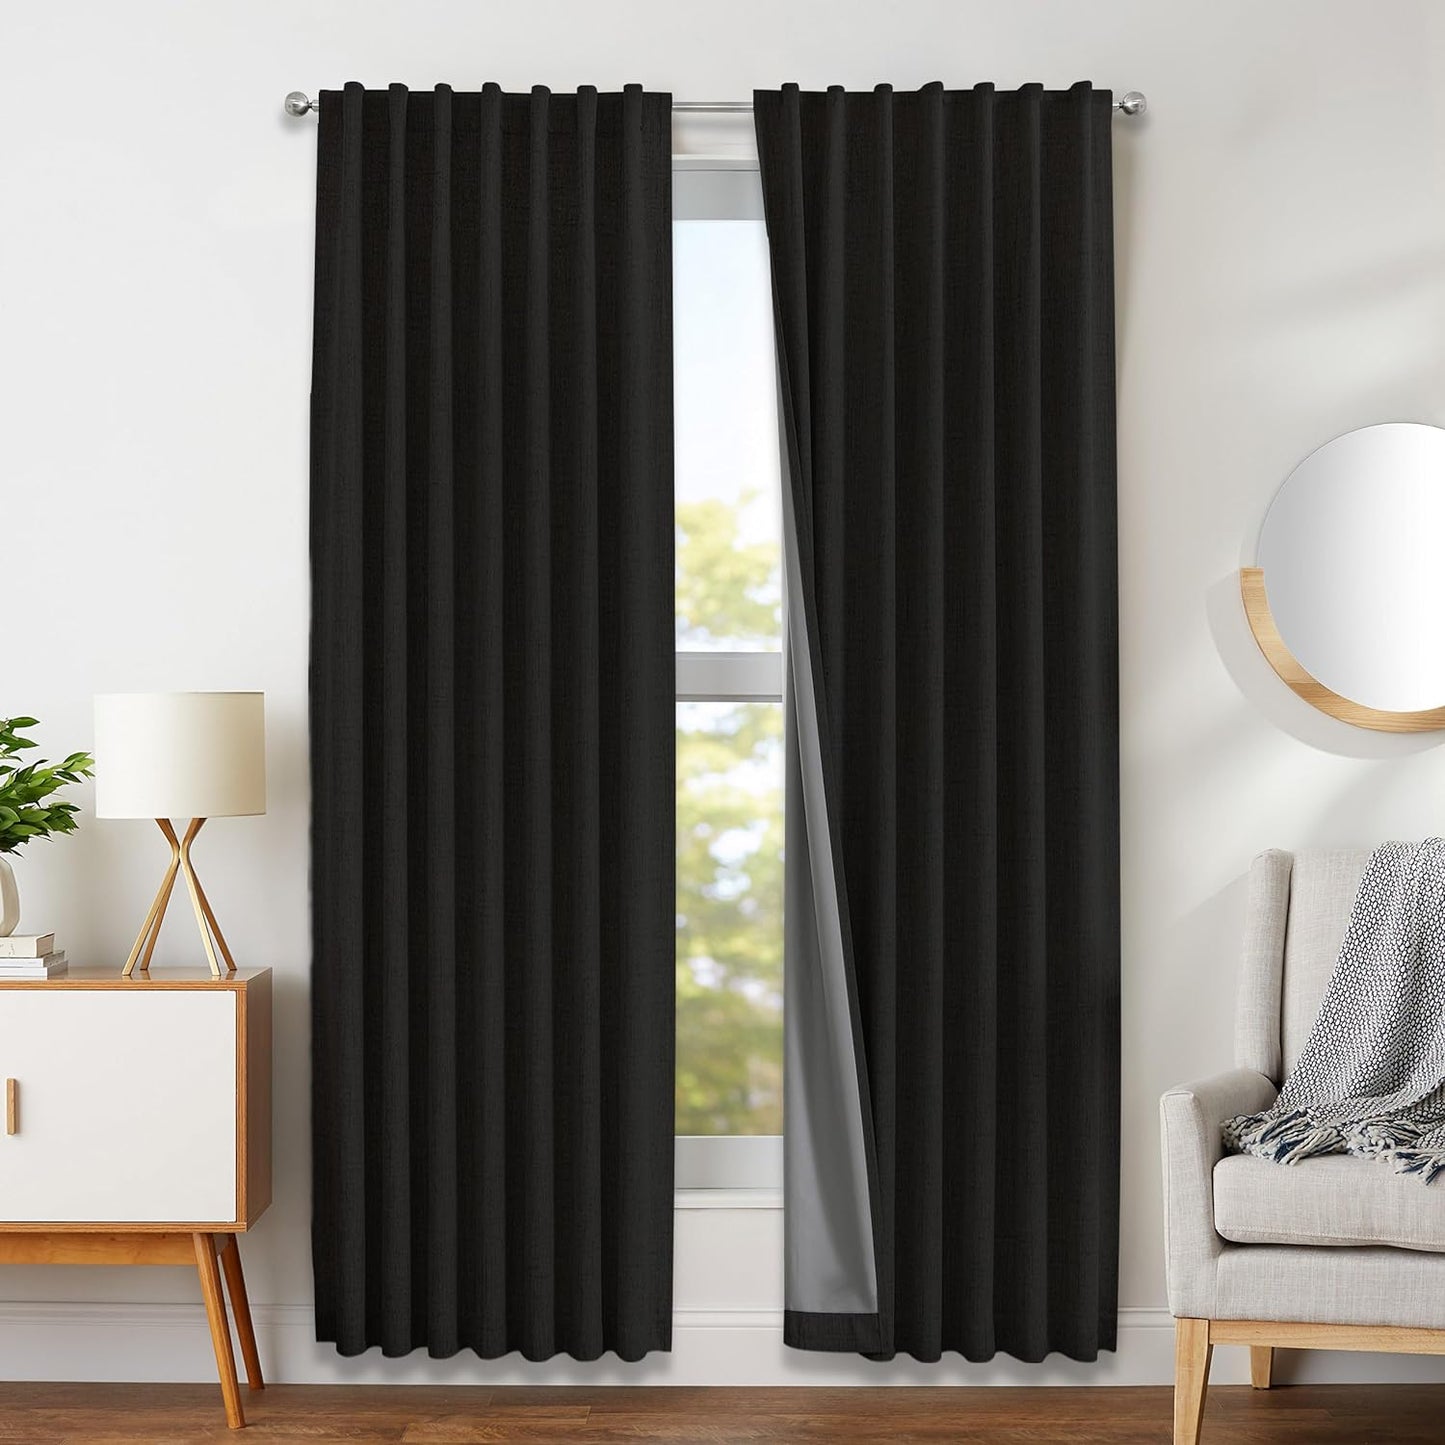 Joydeco 100% Black Out Curtains 96 Inch Long 1 Panels Burg Natural Blackout Linen Drapes for Bedroom Living Room Darkening Curtain Thermal Insulated Back Tab Rod Pocket(70X96 Inch,Black)  Joydeco Black 52W X 120L Inch X 2 Panels 